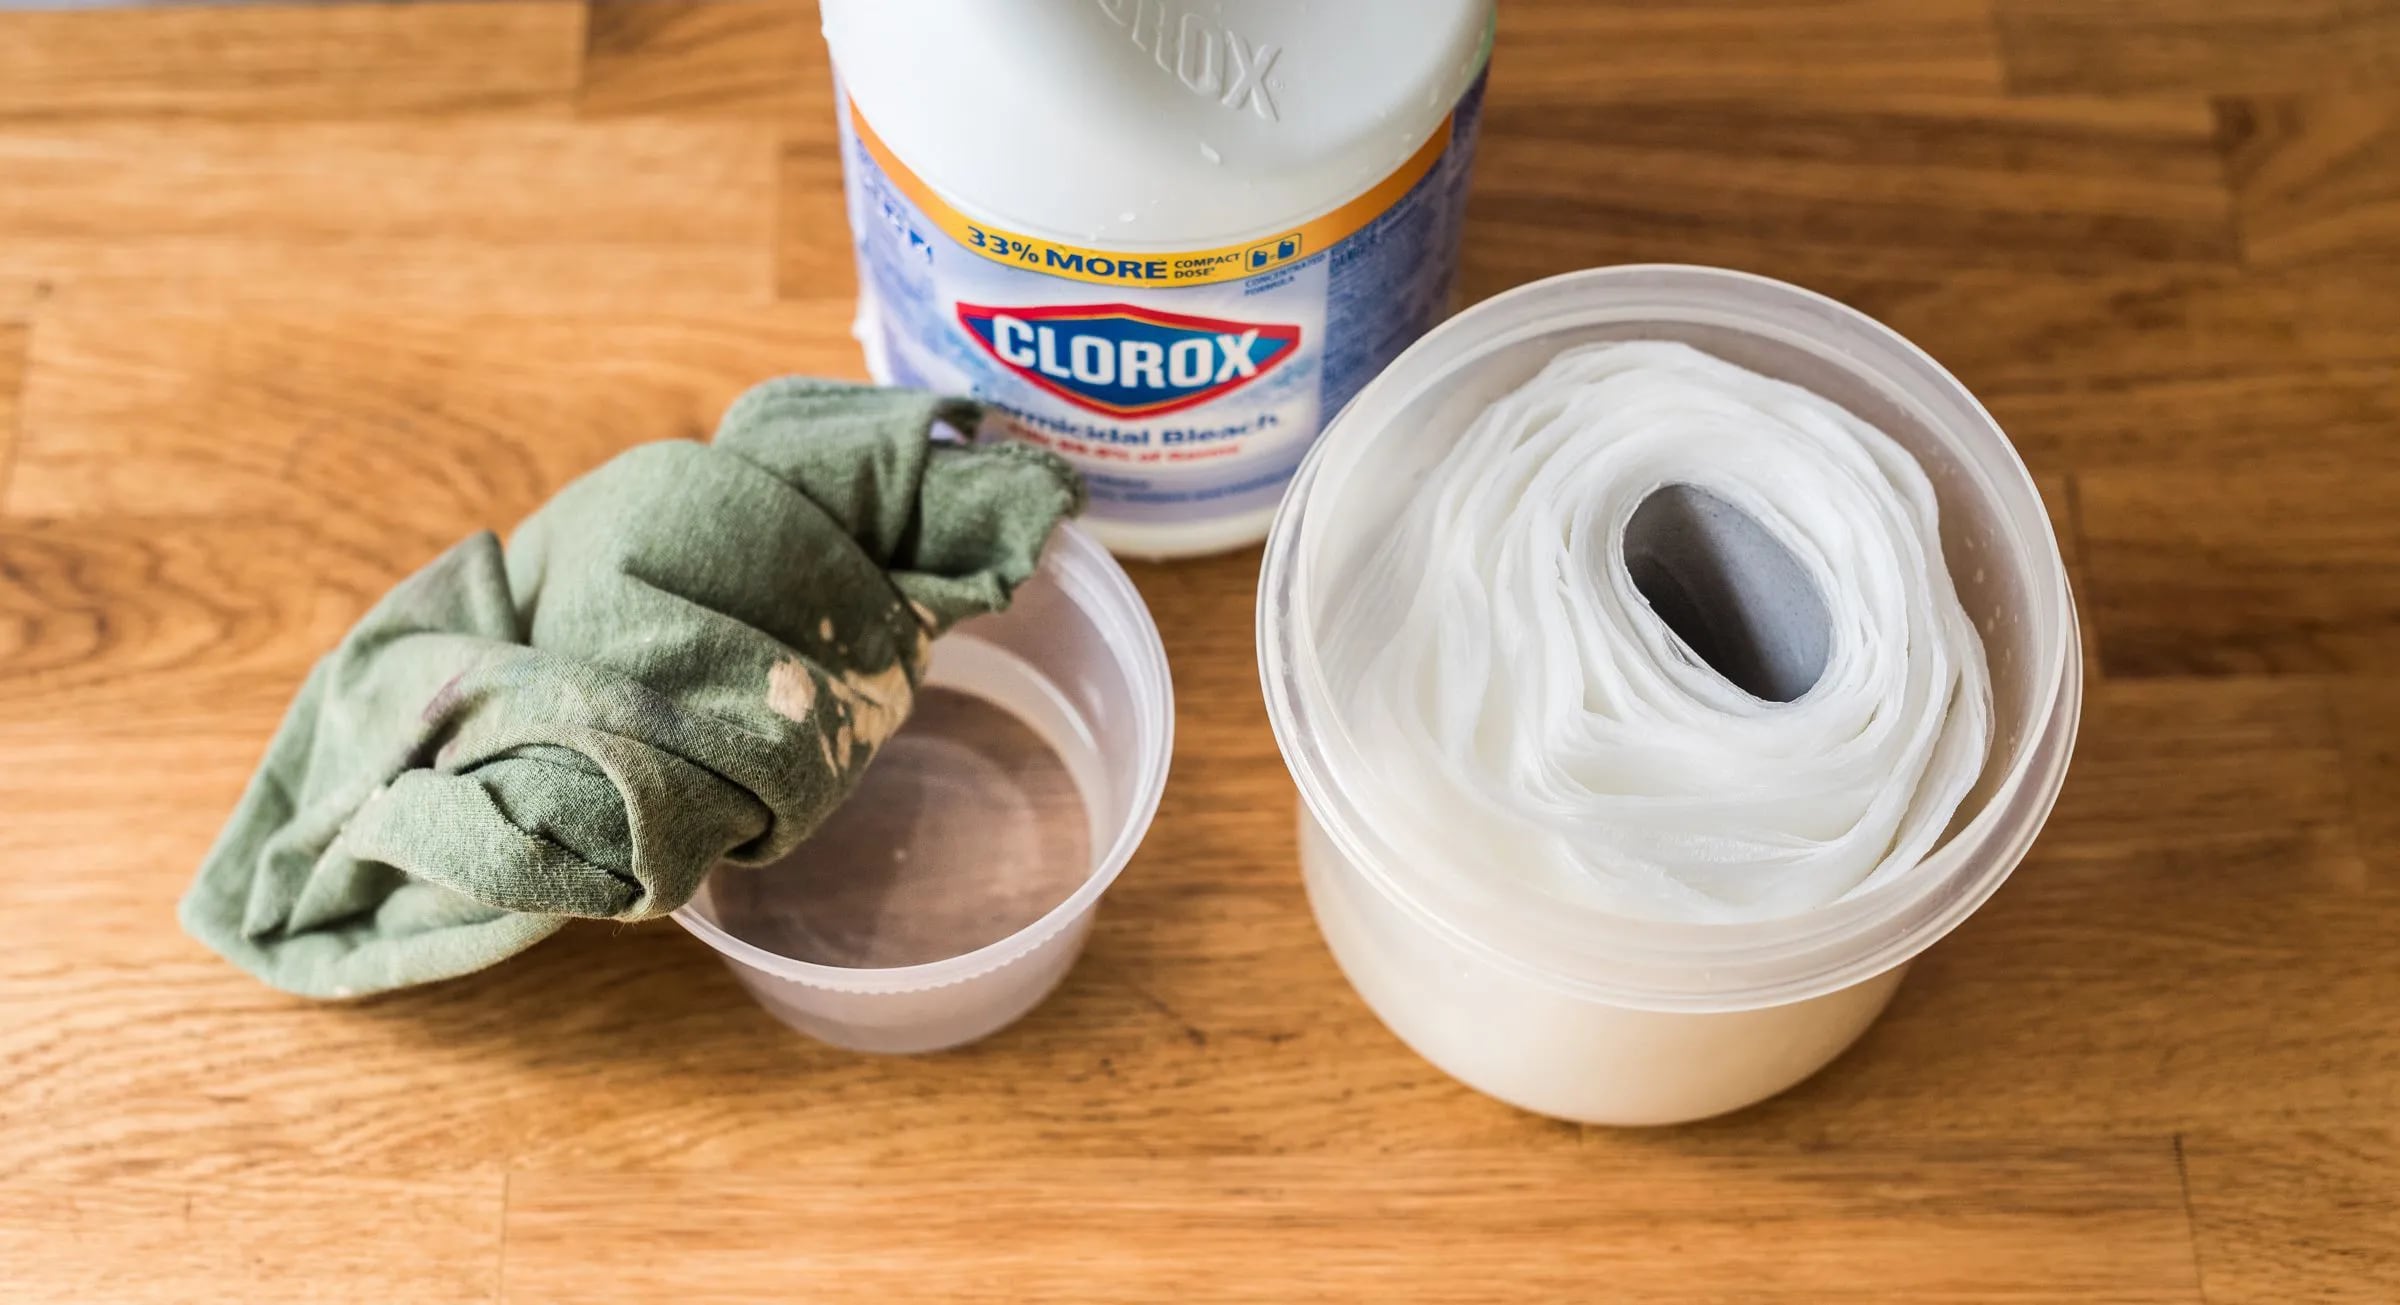 How to make disinfecting wipes with bleach to stay safe against